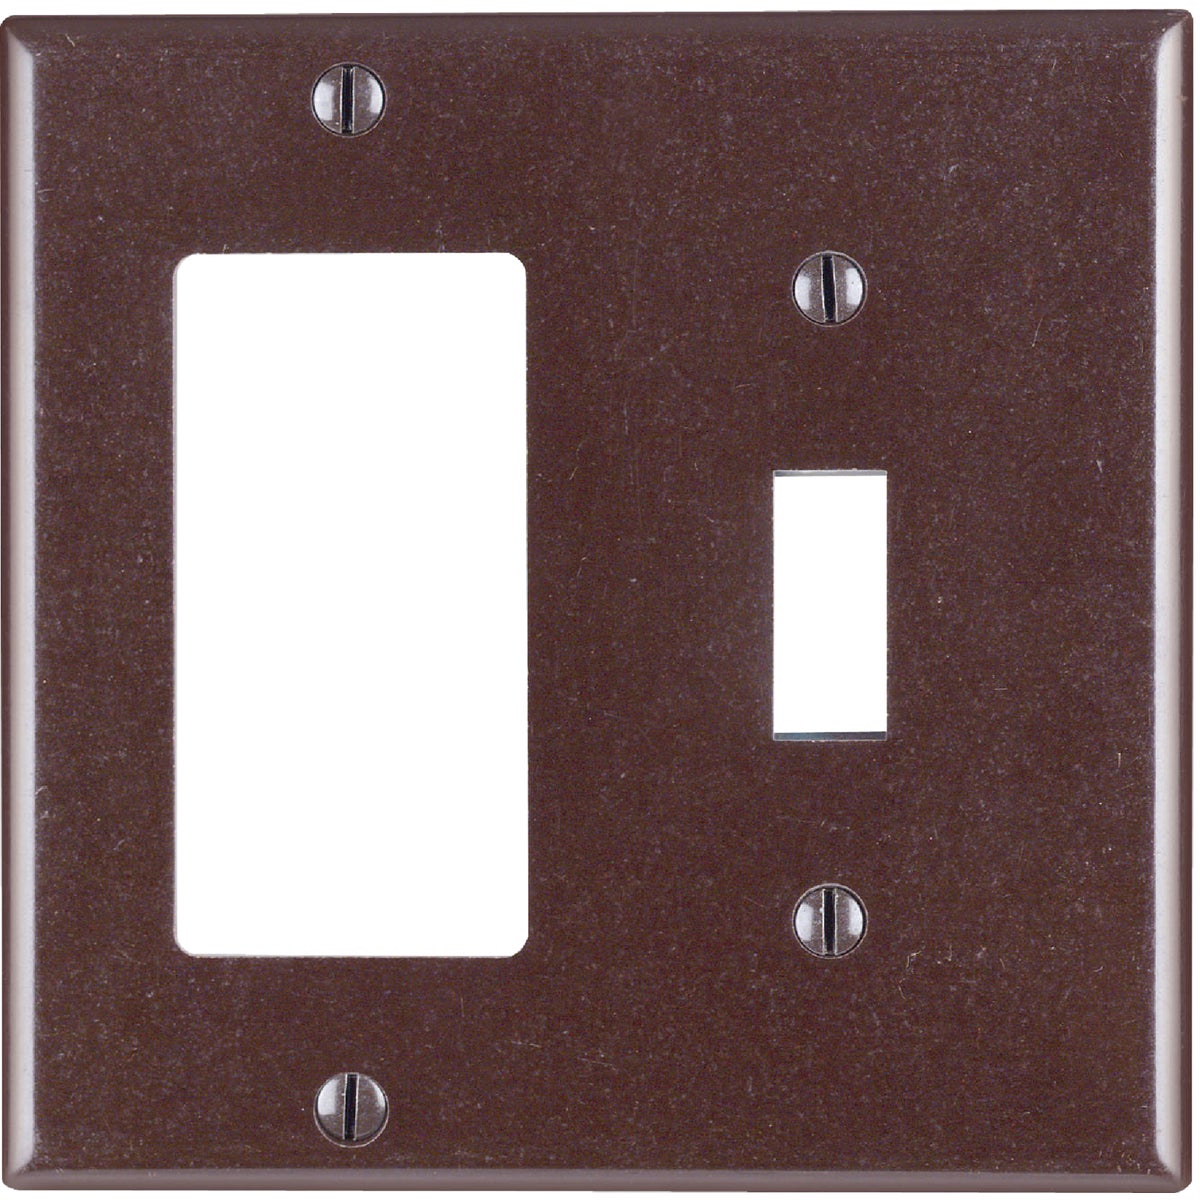 Item 510521, Standard size rocker switch/GFCI (ground fault circuit interrupter) and 